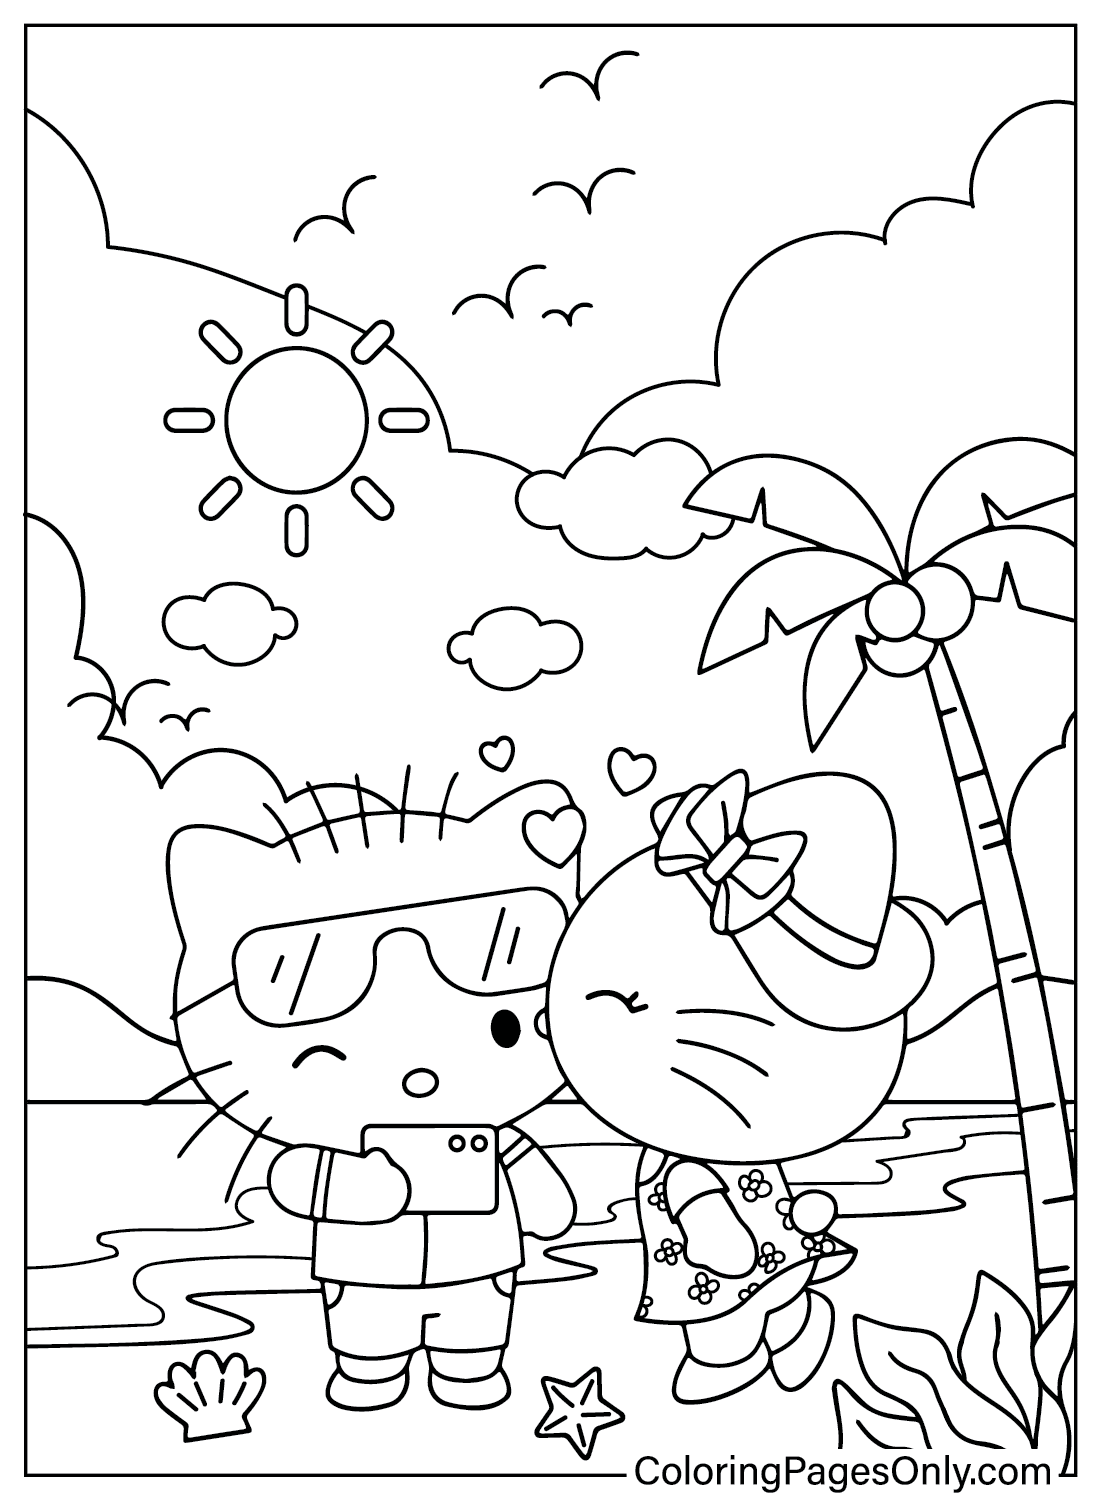 Free Printable Hello Kitty Coloring Page